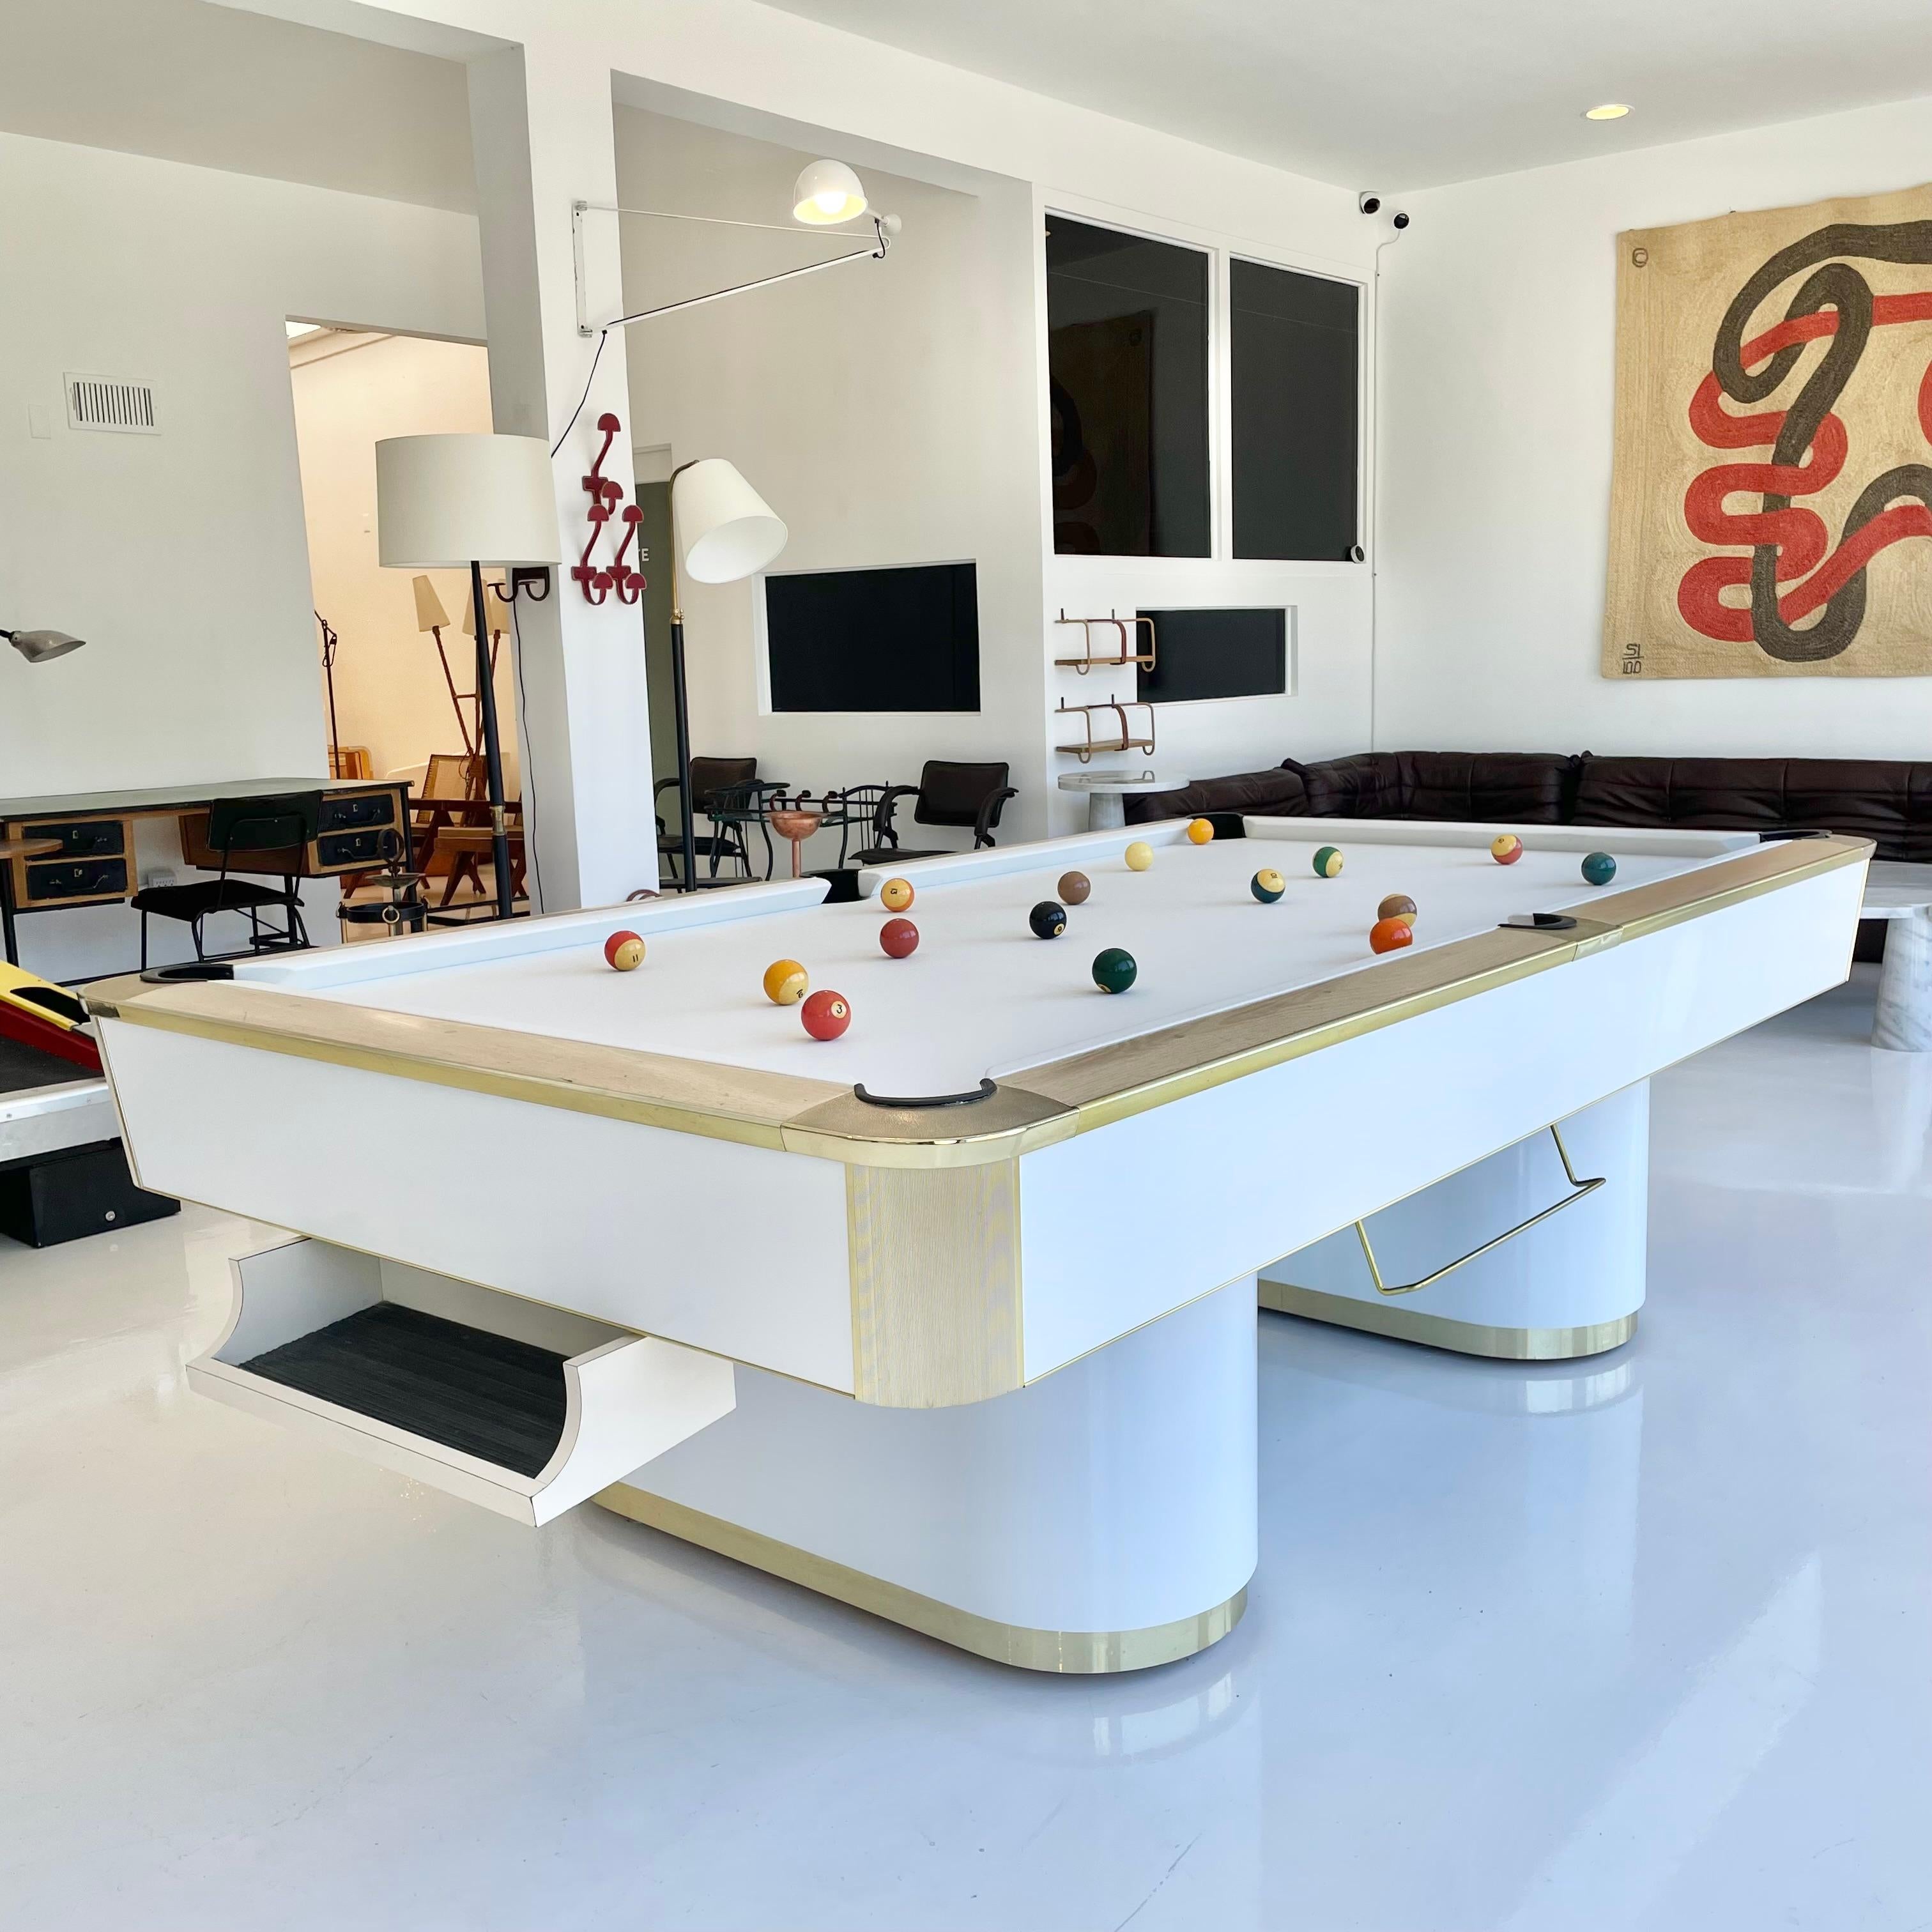 murrey and sons pool table